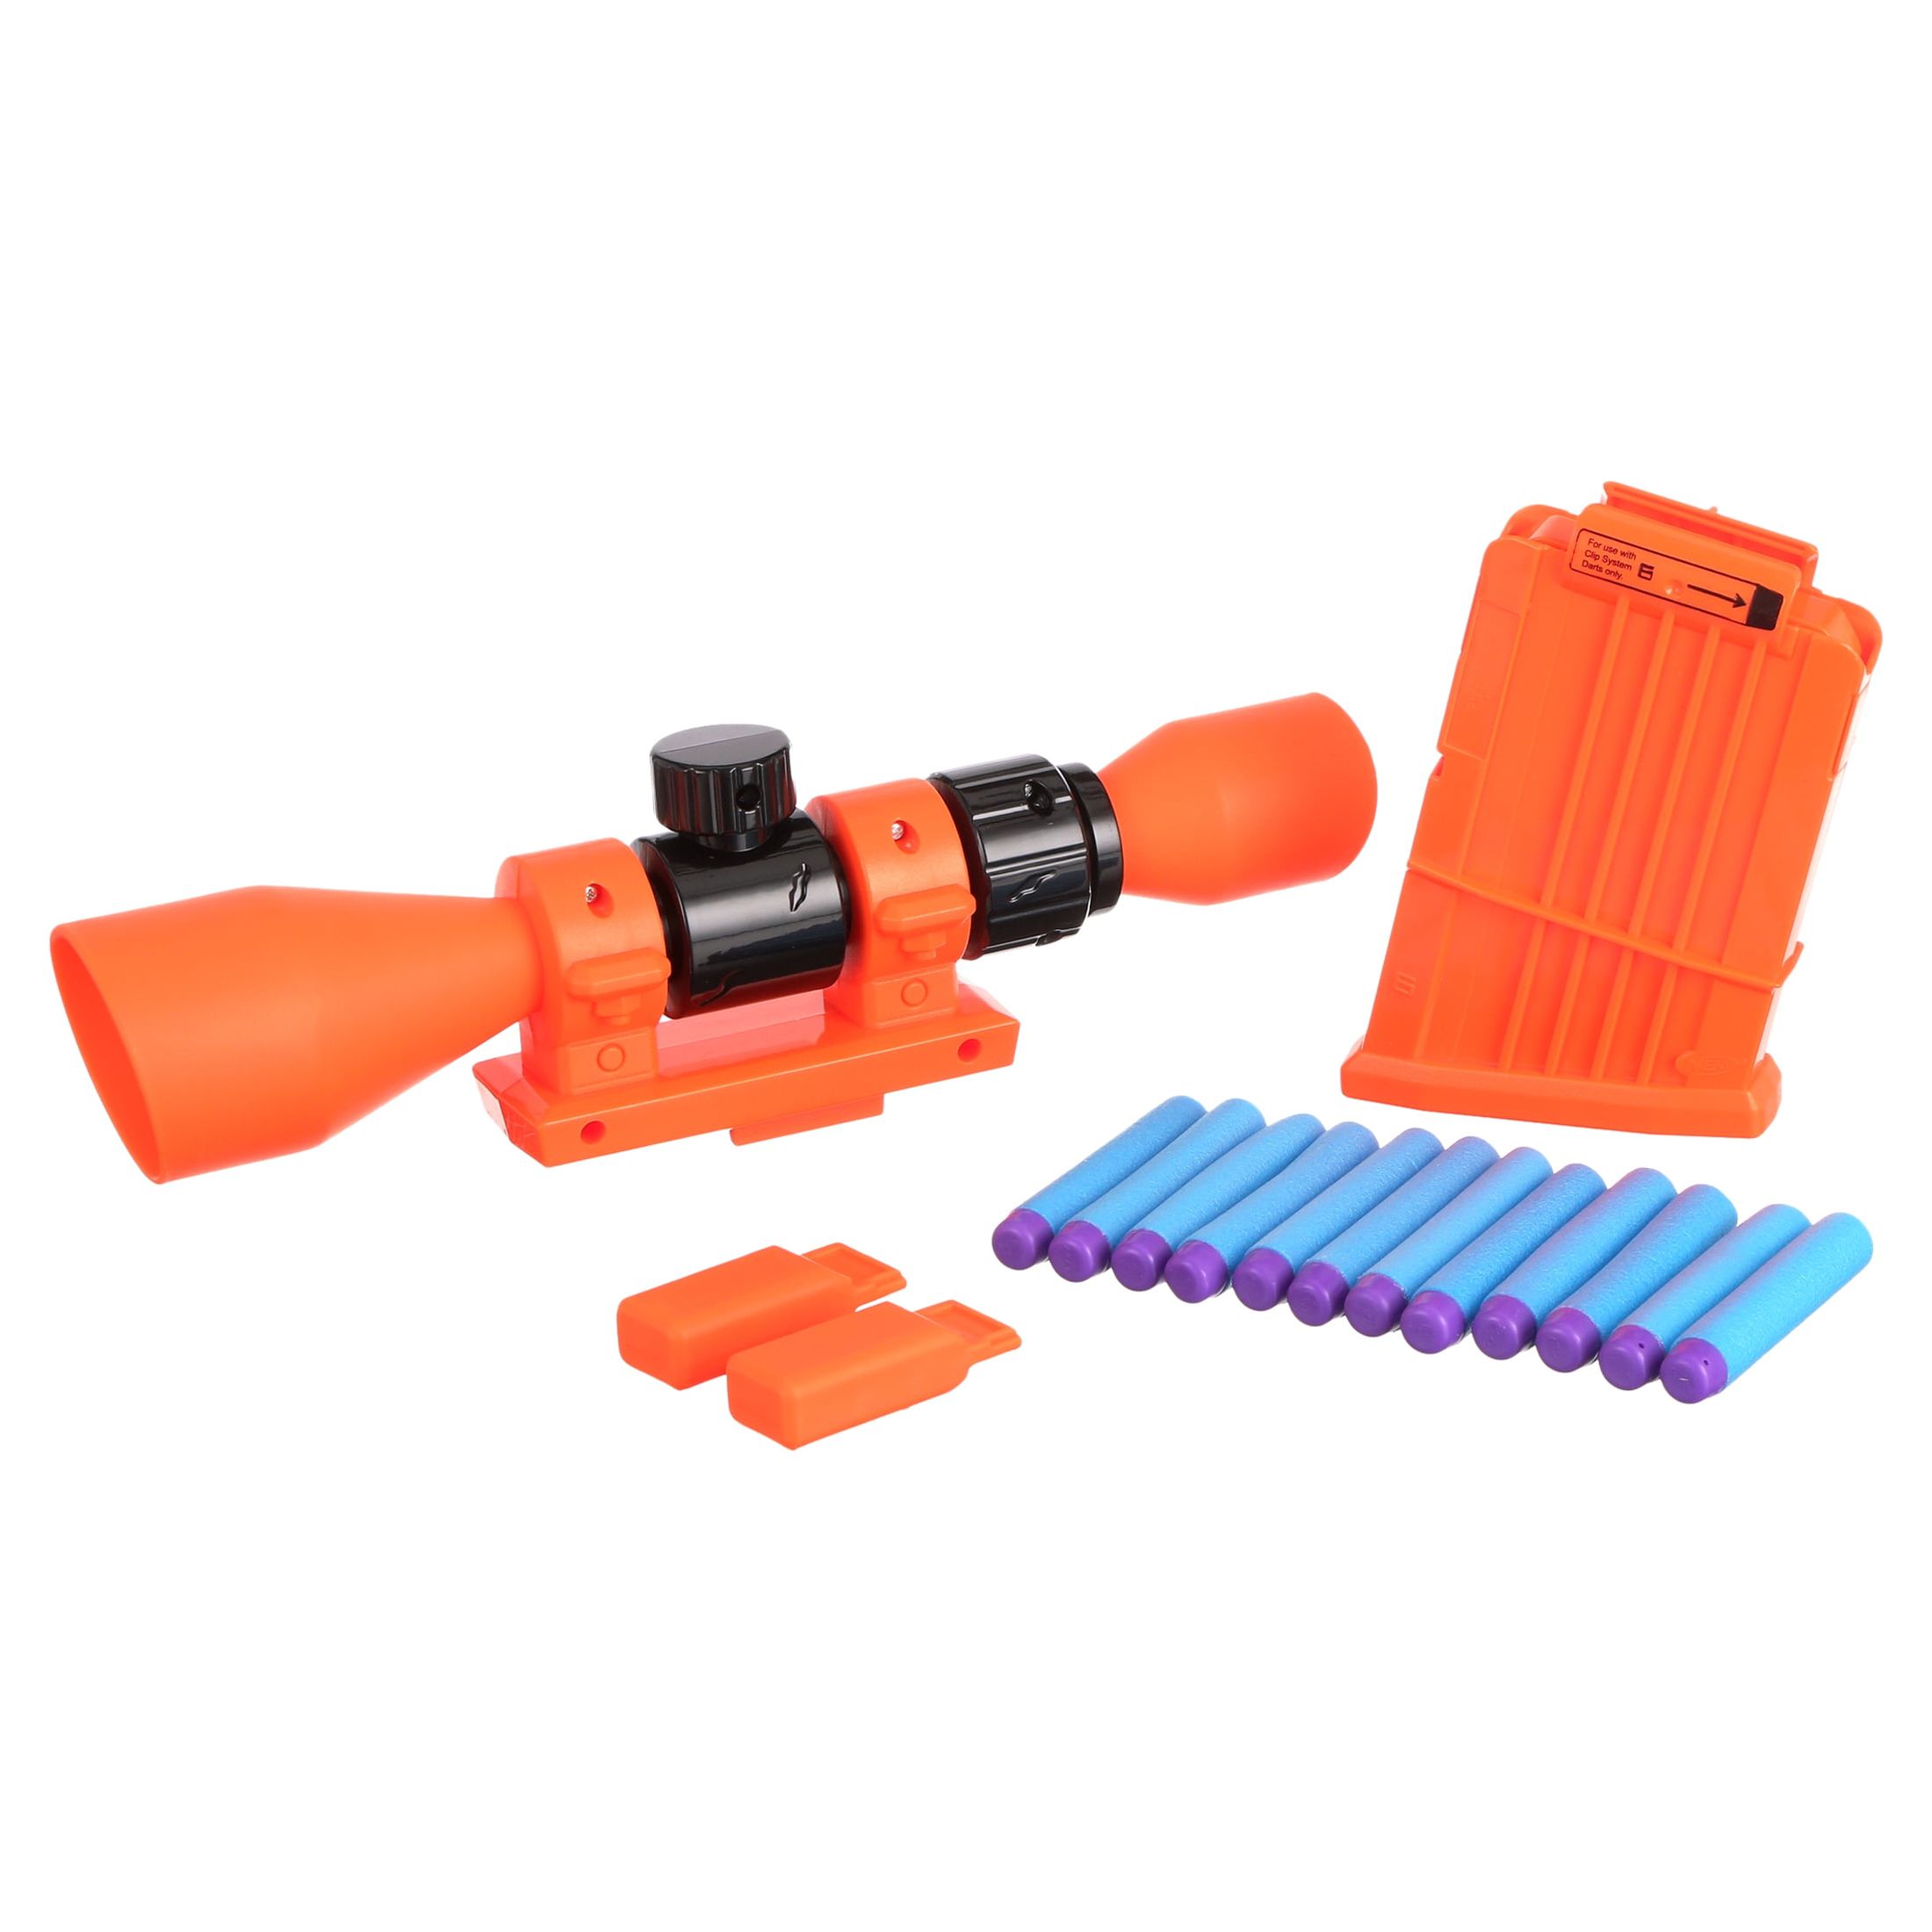 Nerf Fortnite BASR-L Blaster, Includes 12 Official Darts, Kids Toy for Boys and Girls for Ages 8+ - image 4 of 6